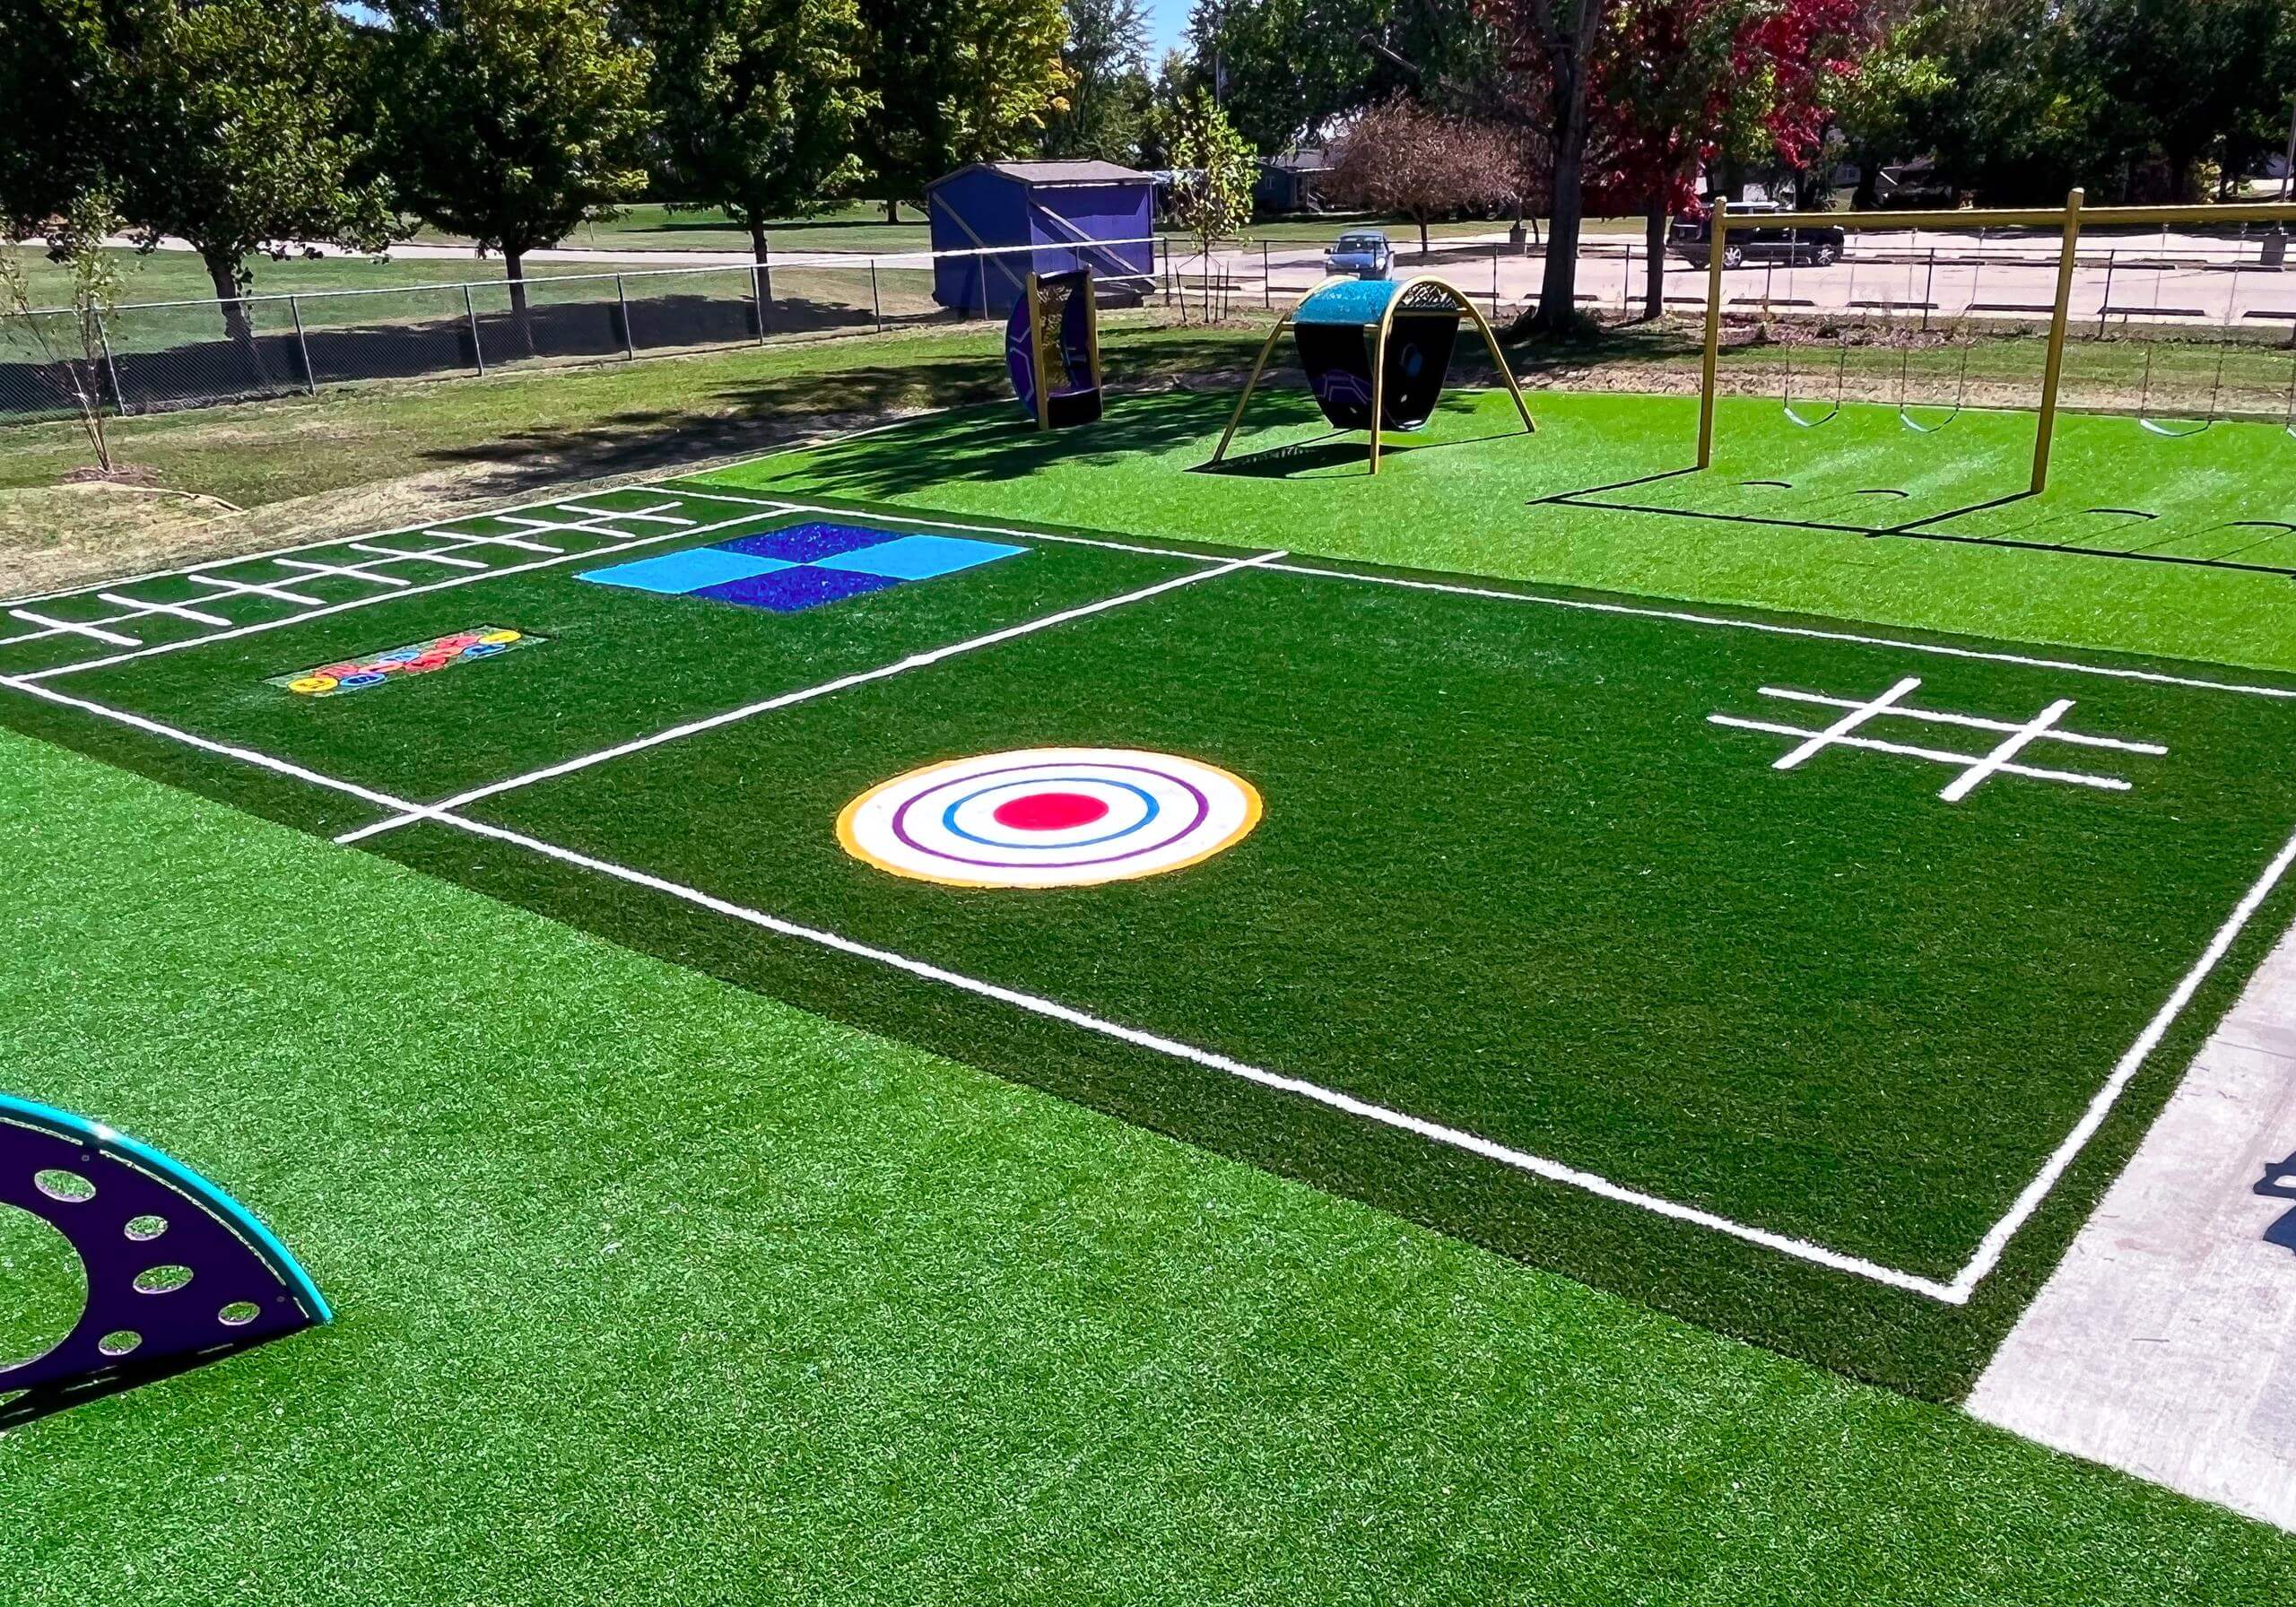 Playground with ForeverLawn synthetic grass featuring a 'Funserts'  design.